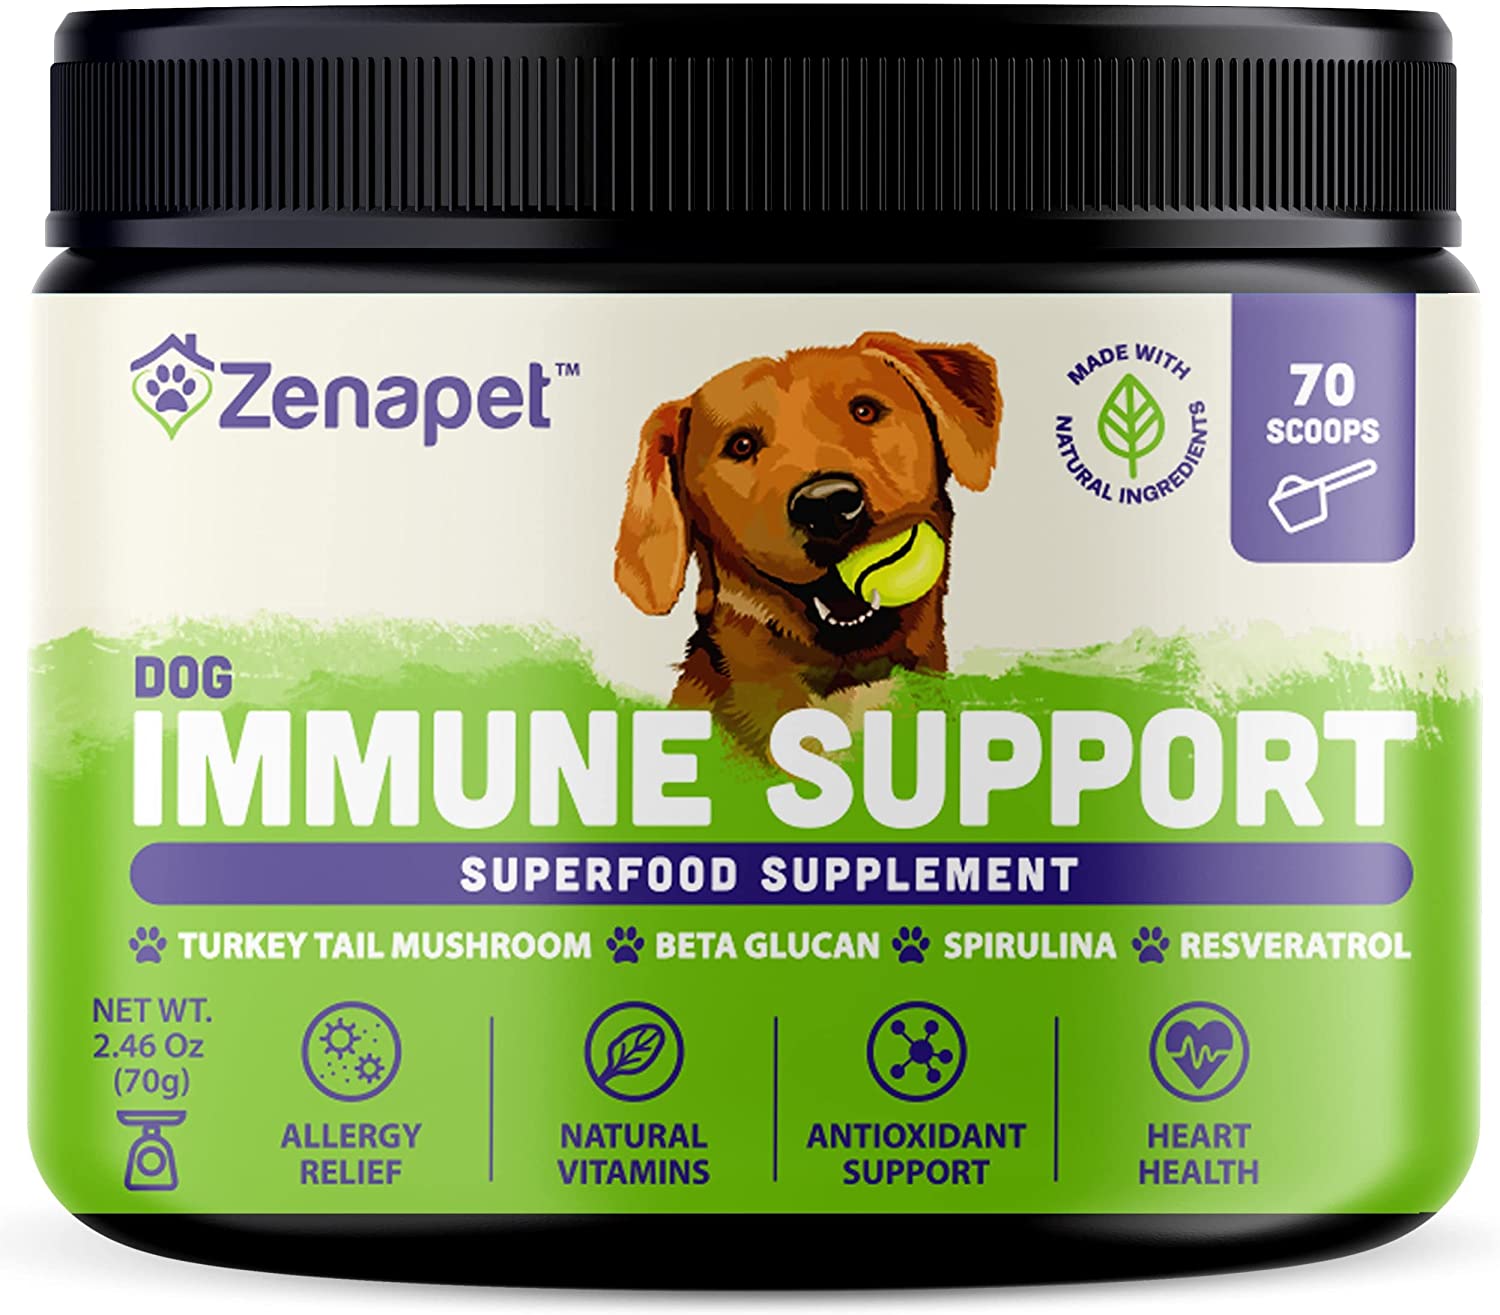 Superfood Allergy Immune Supplement for Dogs